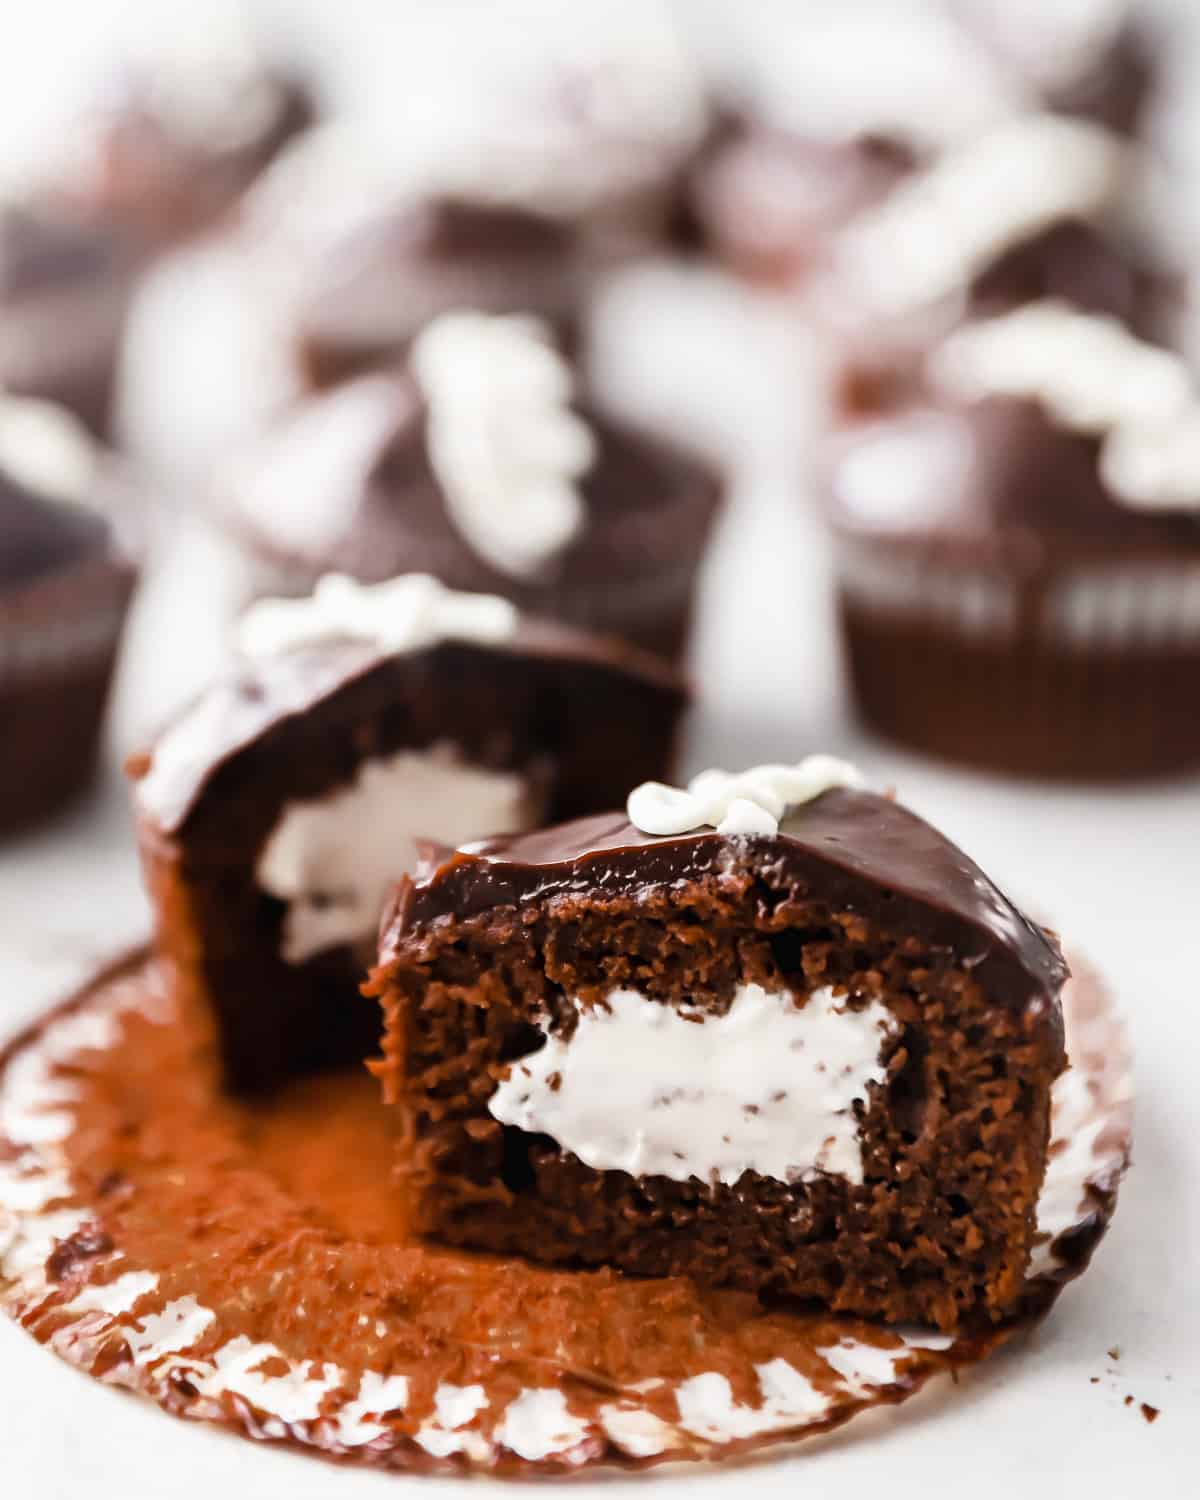 side view of a halved chocolate hostess cupcake showing the filling on top of a cupcake liner.